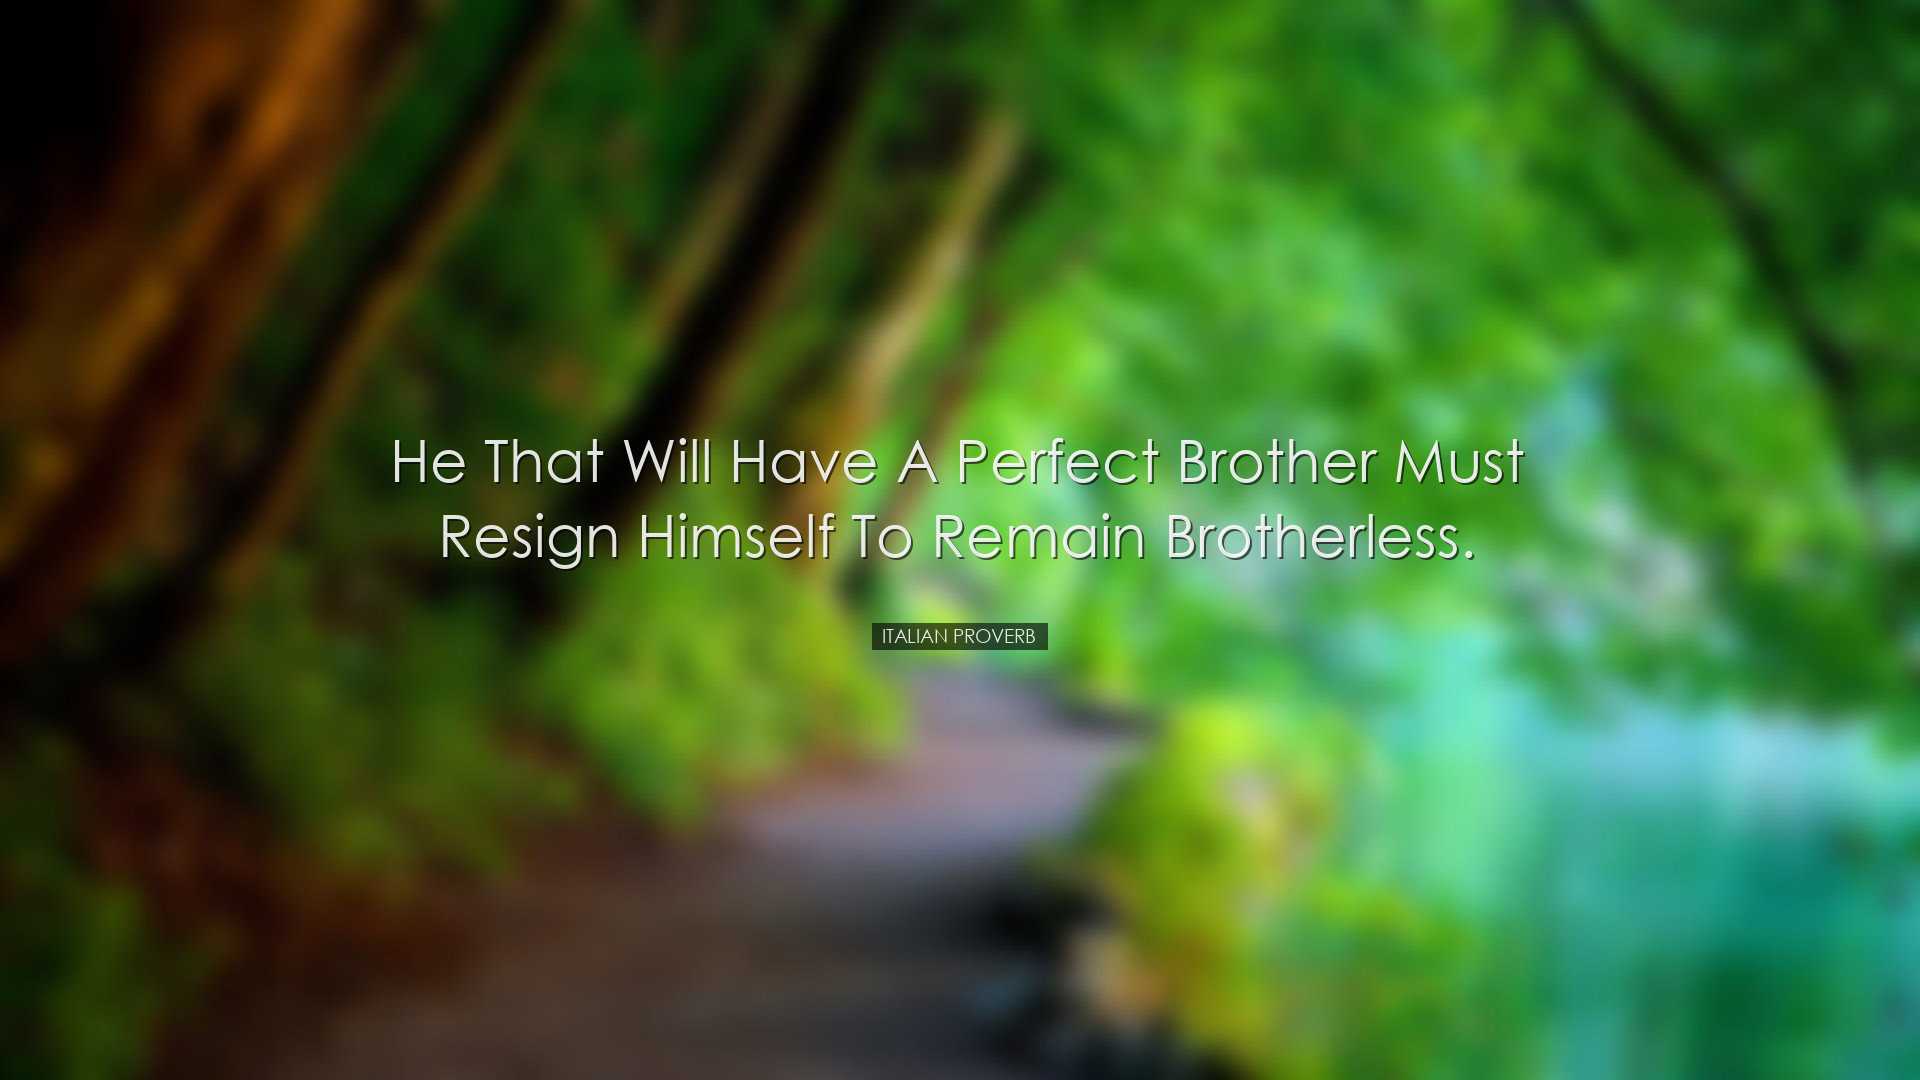 He that will have a perfect brother must resign himself to remain